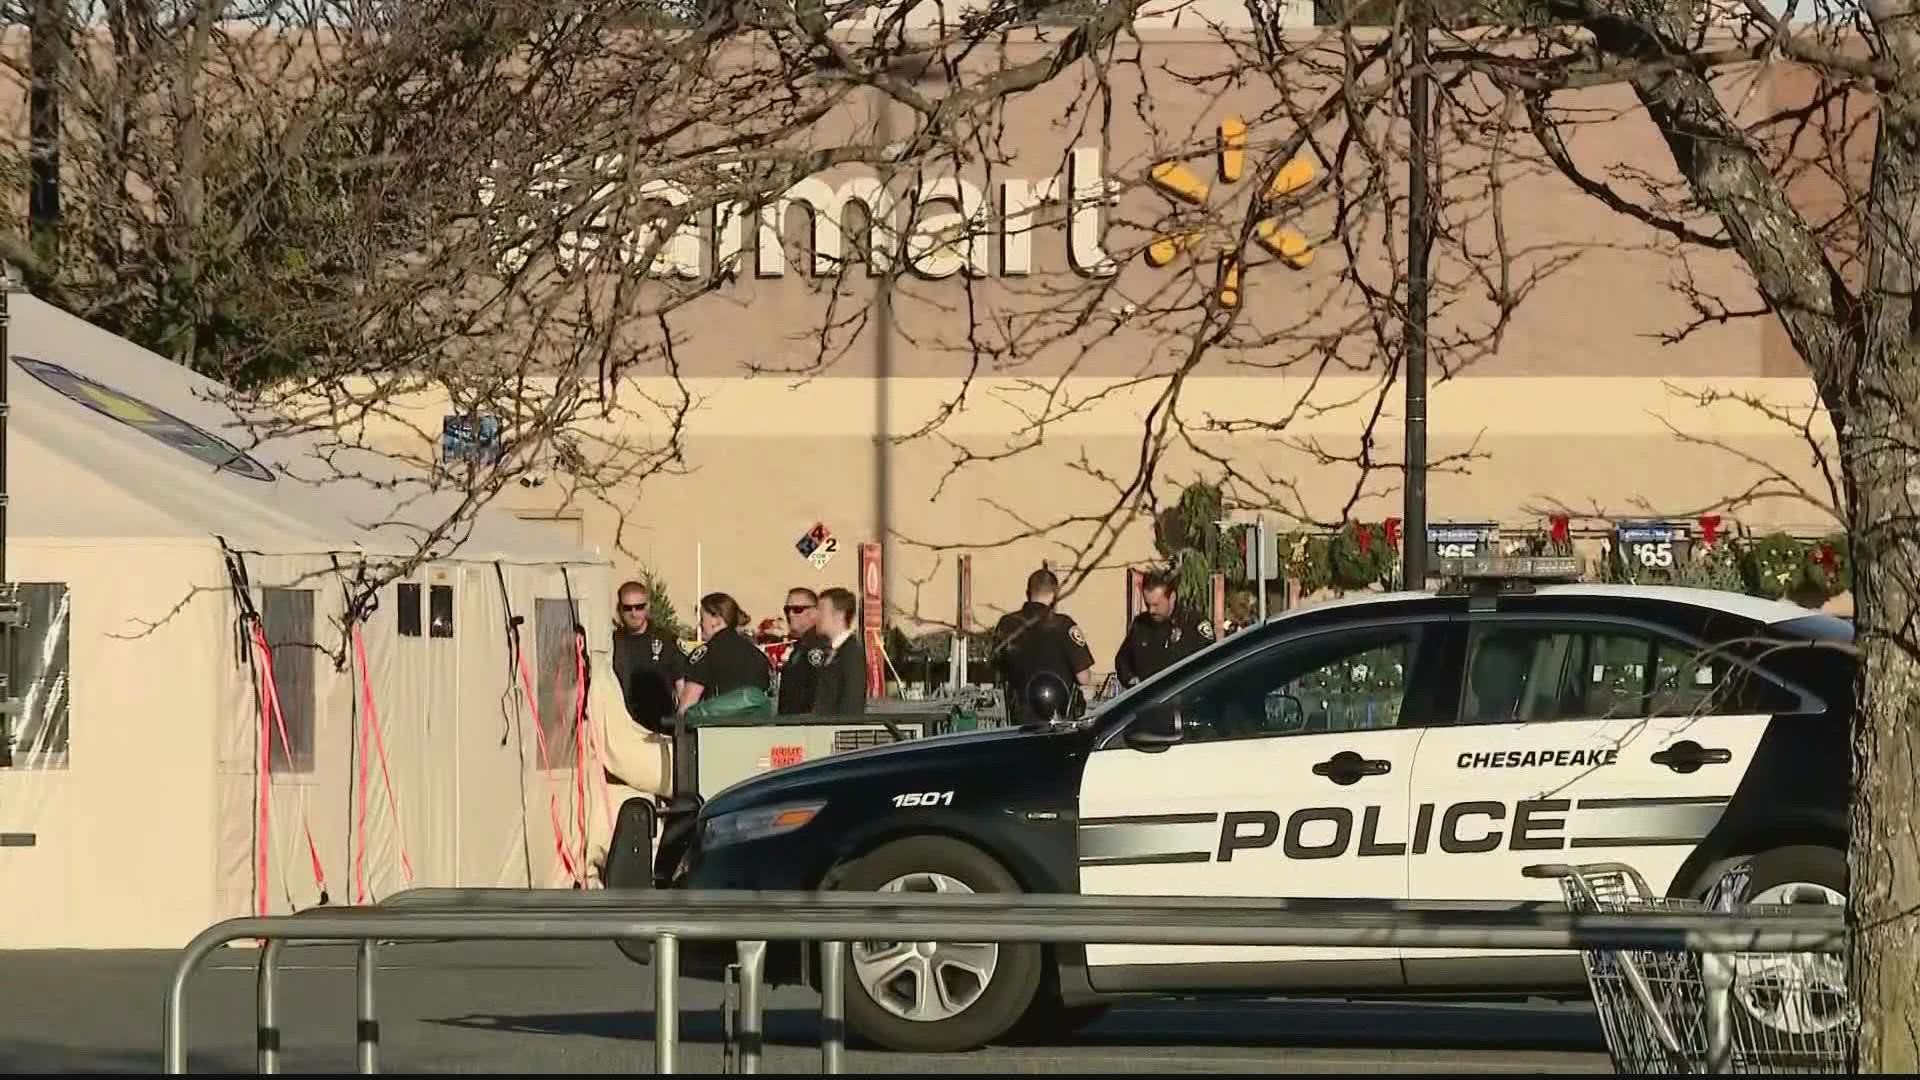 An employee at Virginia Walmart said she filed a written complaint to the company of the suspected gunman’s “bizarre” behavior months before the shooting.